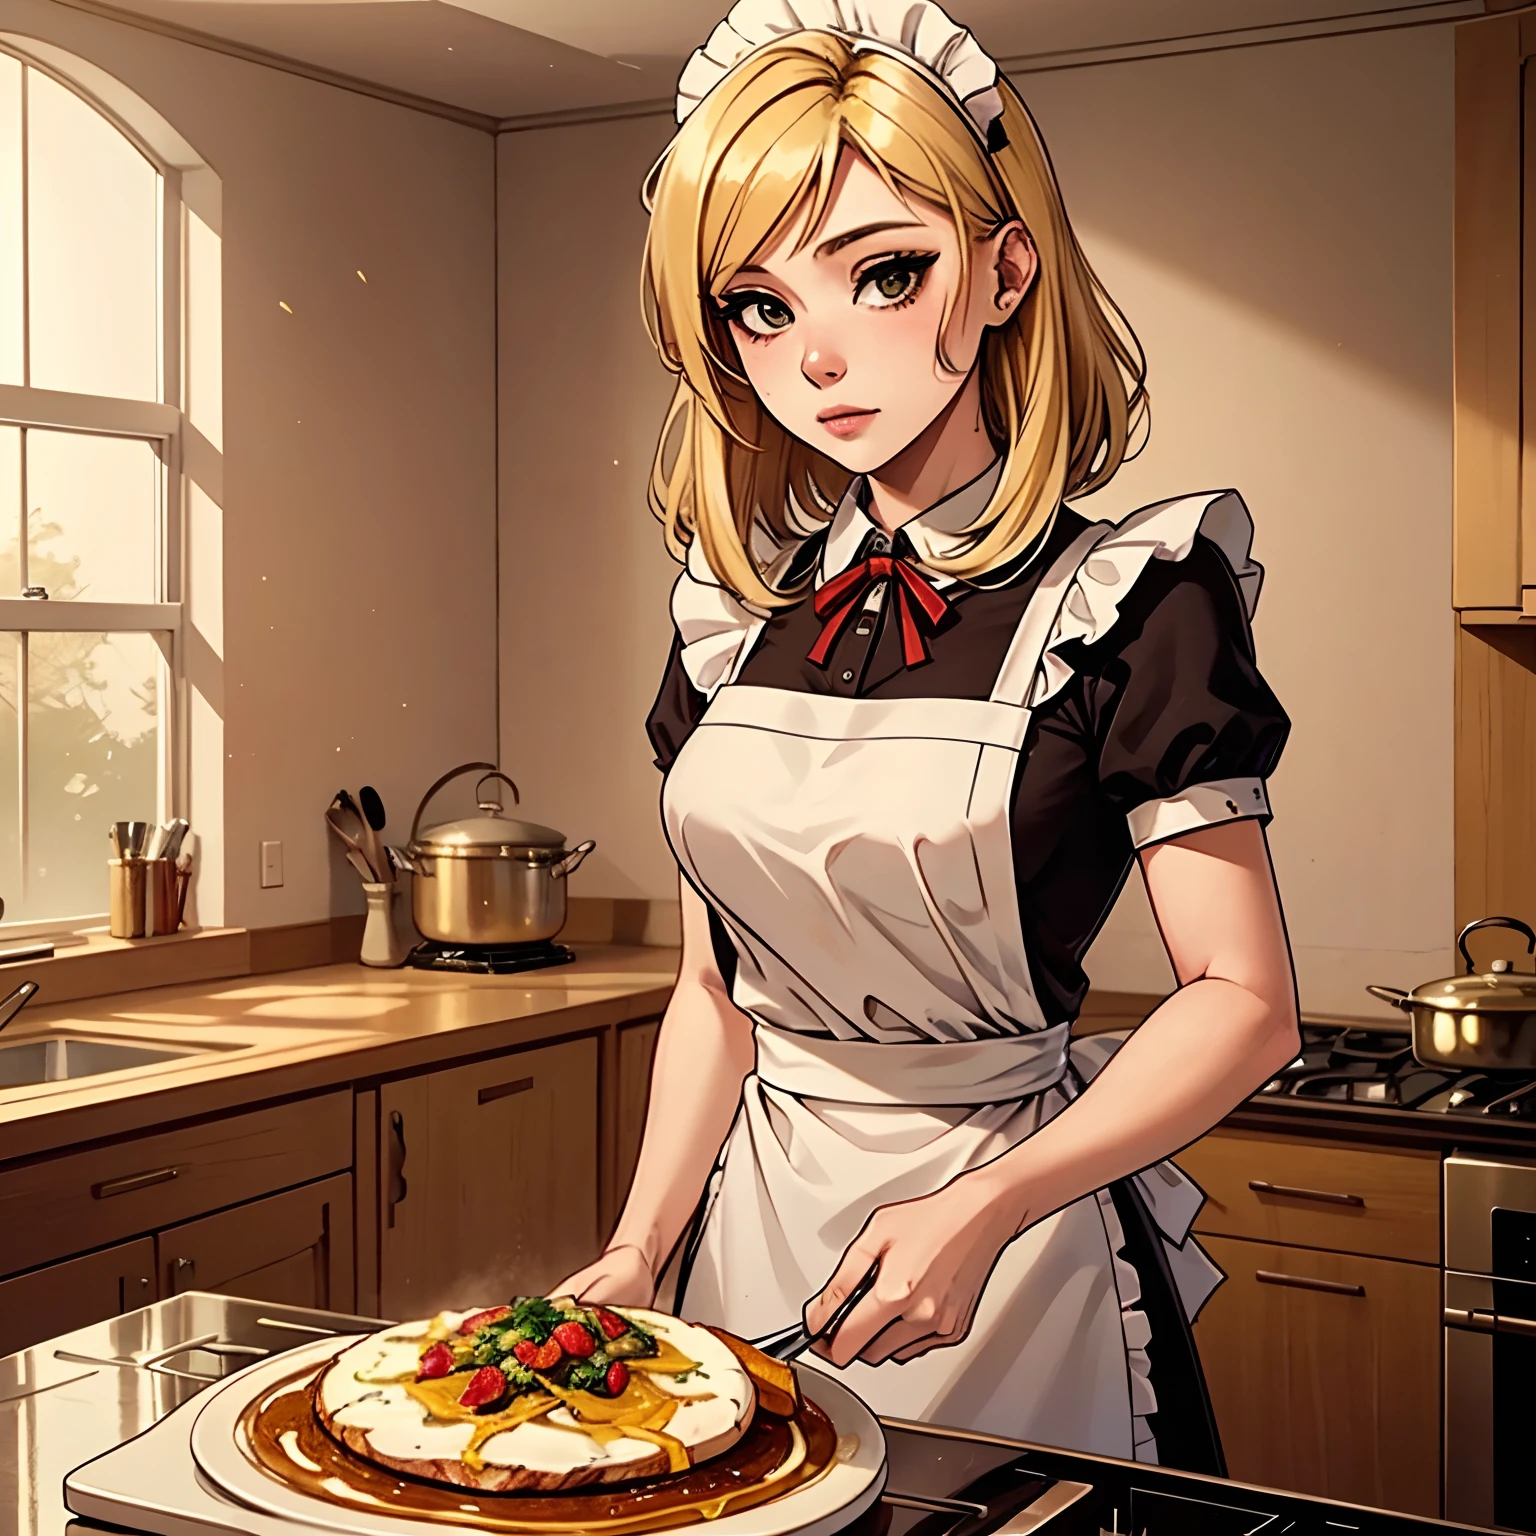 a young adult women, blond long_hime_cut_hairstyle, hazel eyes, maid attire., cooking food, mansion kitchen, 4k, HD, detailed, masterpiece, medium shots